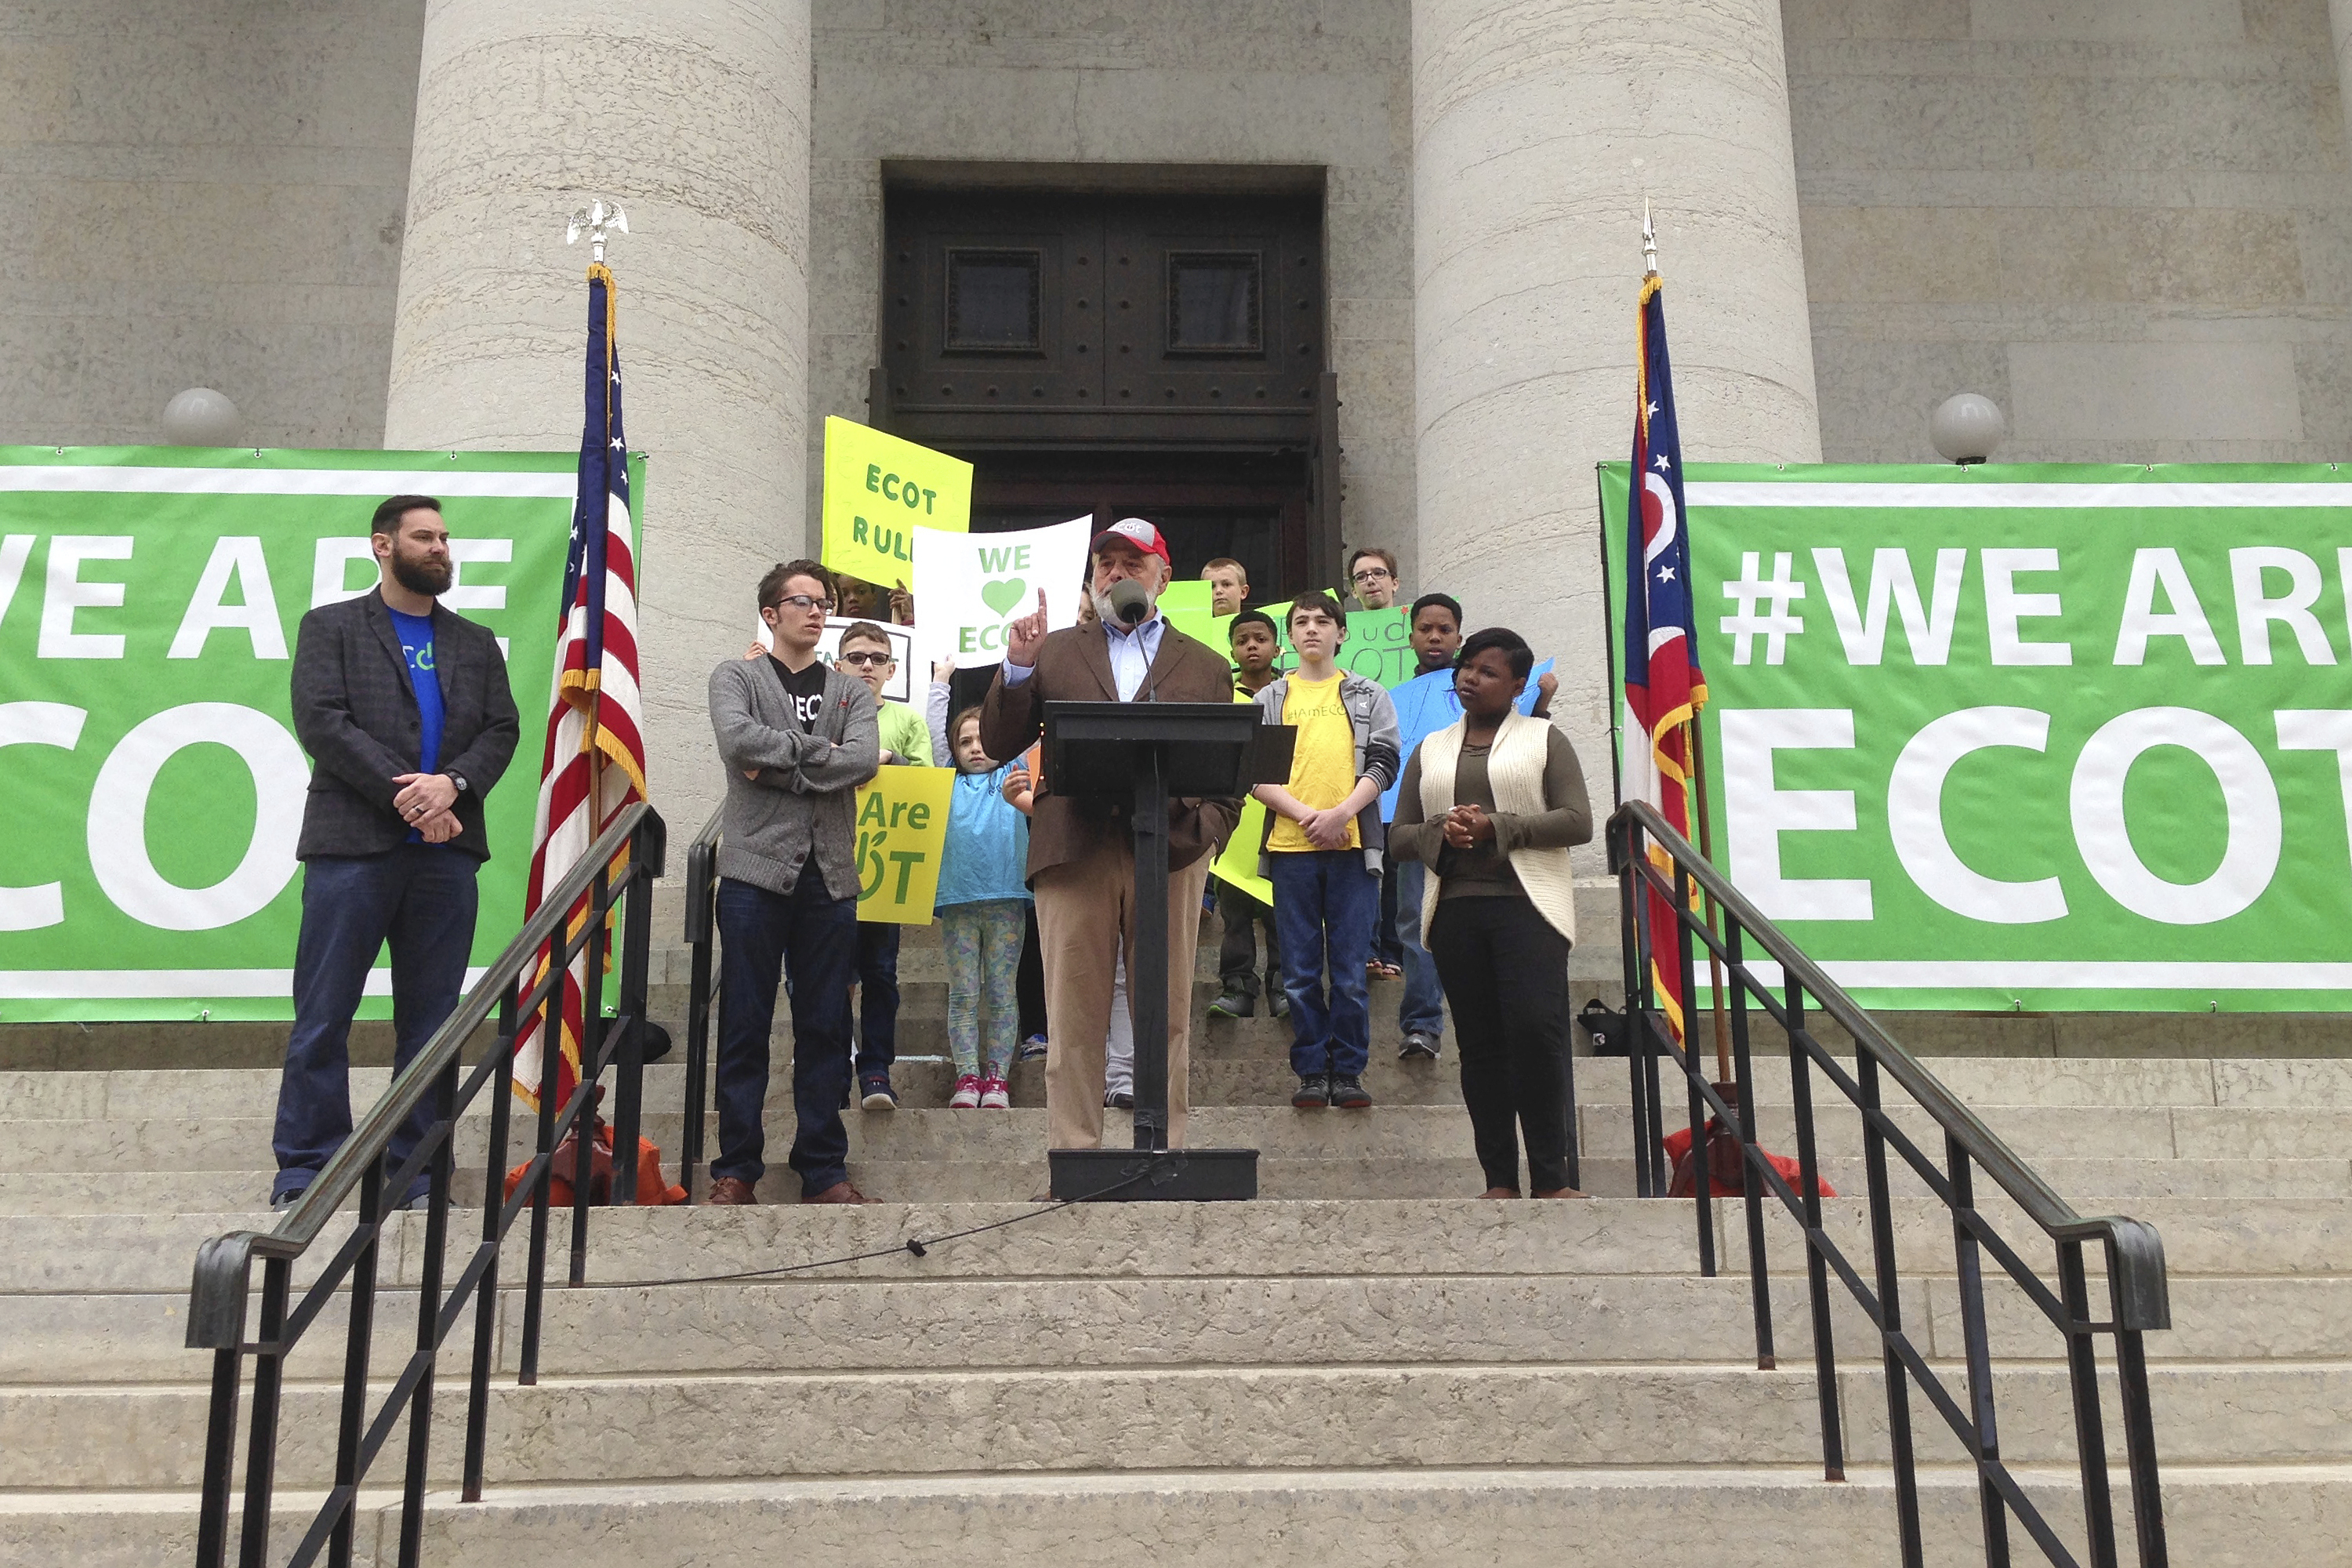 franklin county prosecutor seeks outside counsel for ecot case